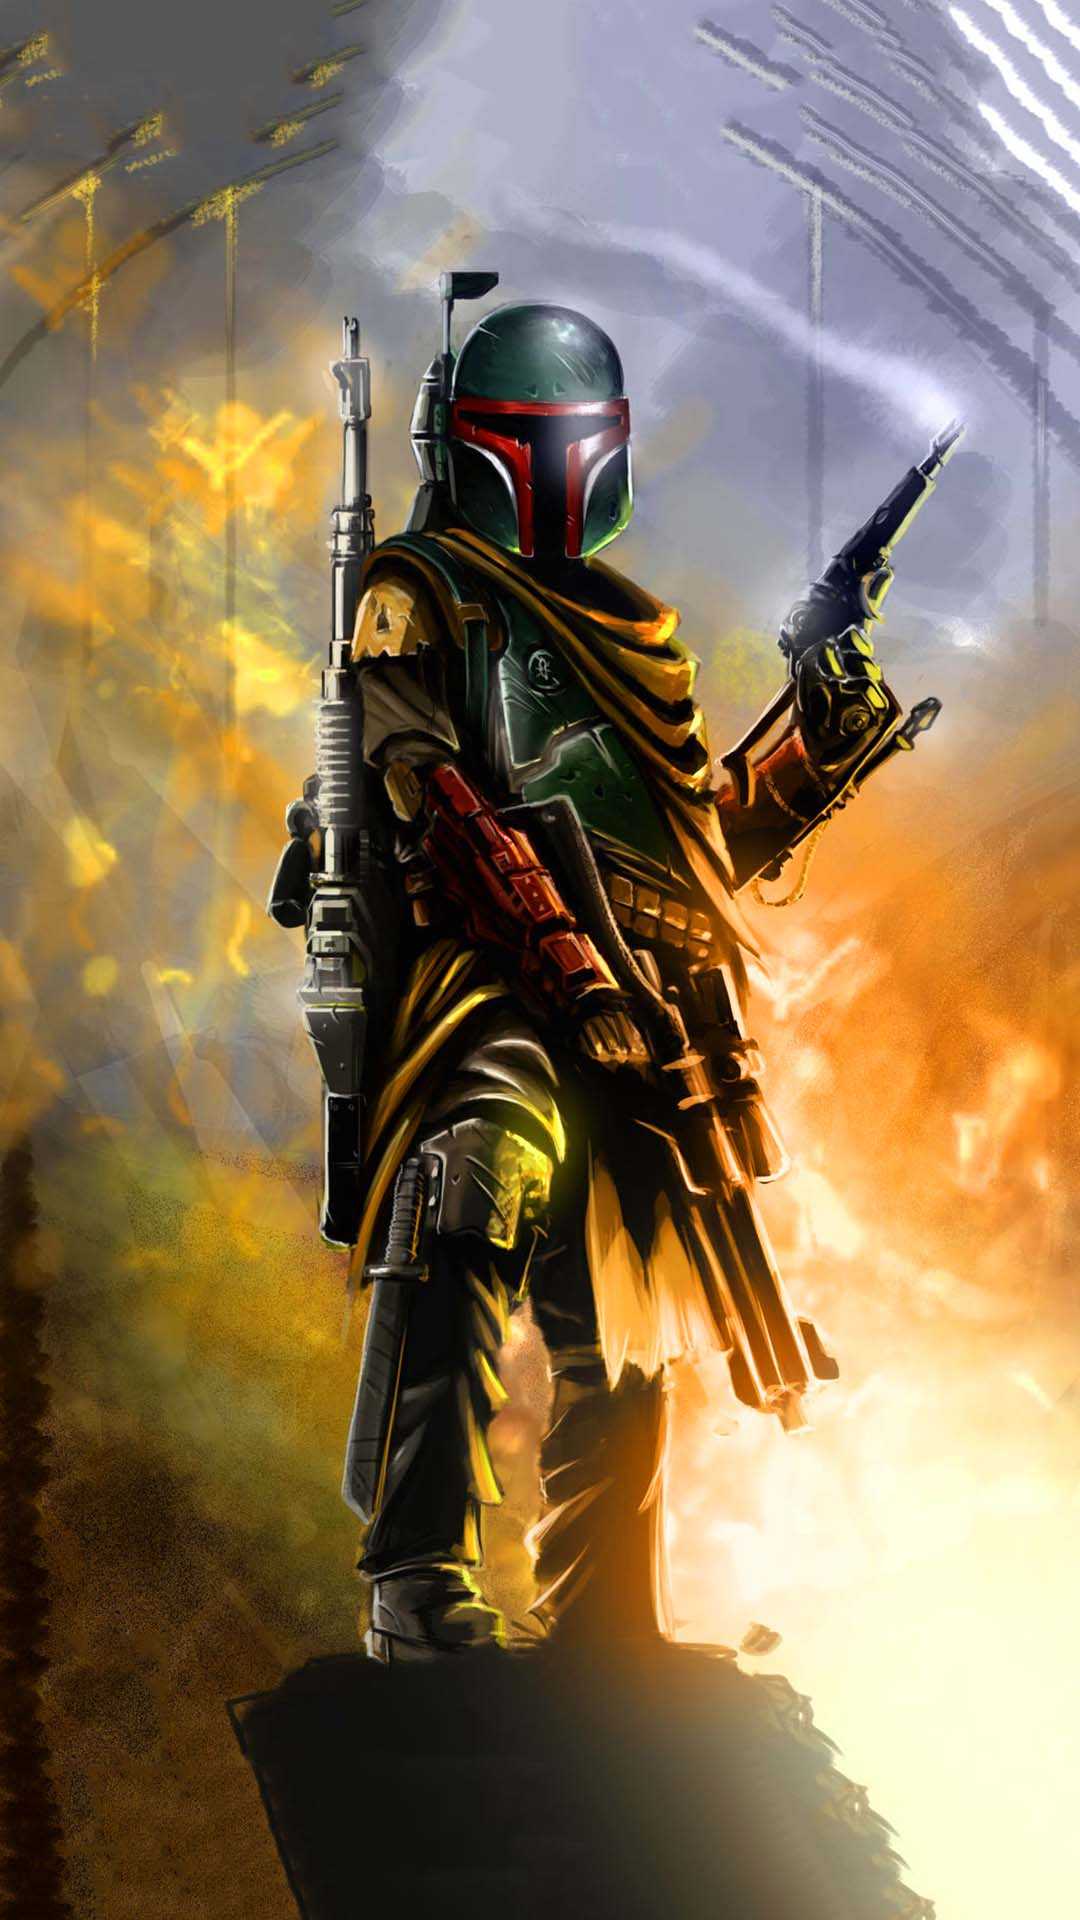 The Book Of Boba Fett Official Wallpaper, HD TV Series 4K Wallpapers,  Images and Background - Wallpapers Den